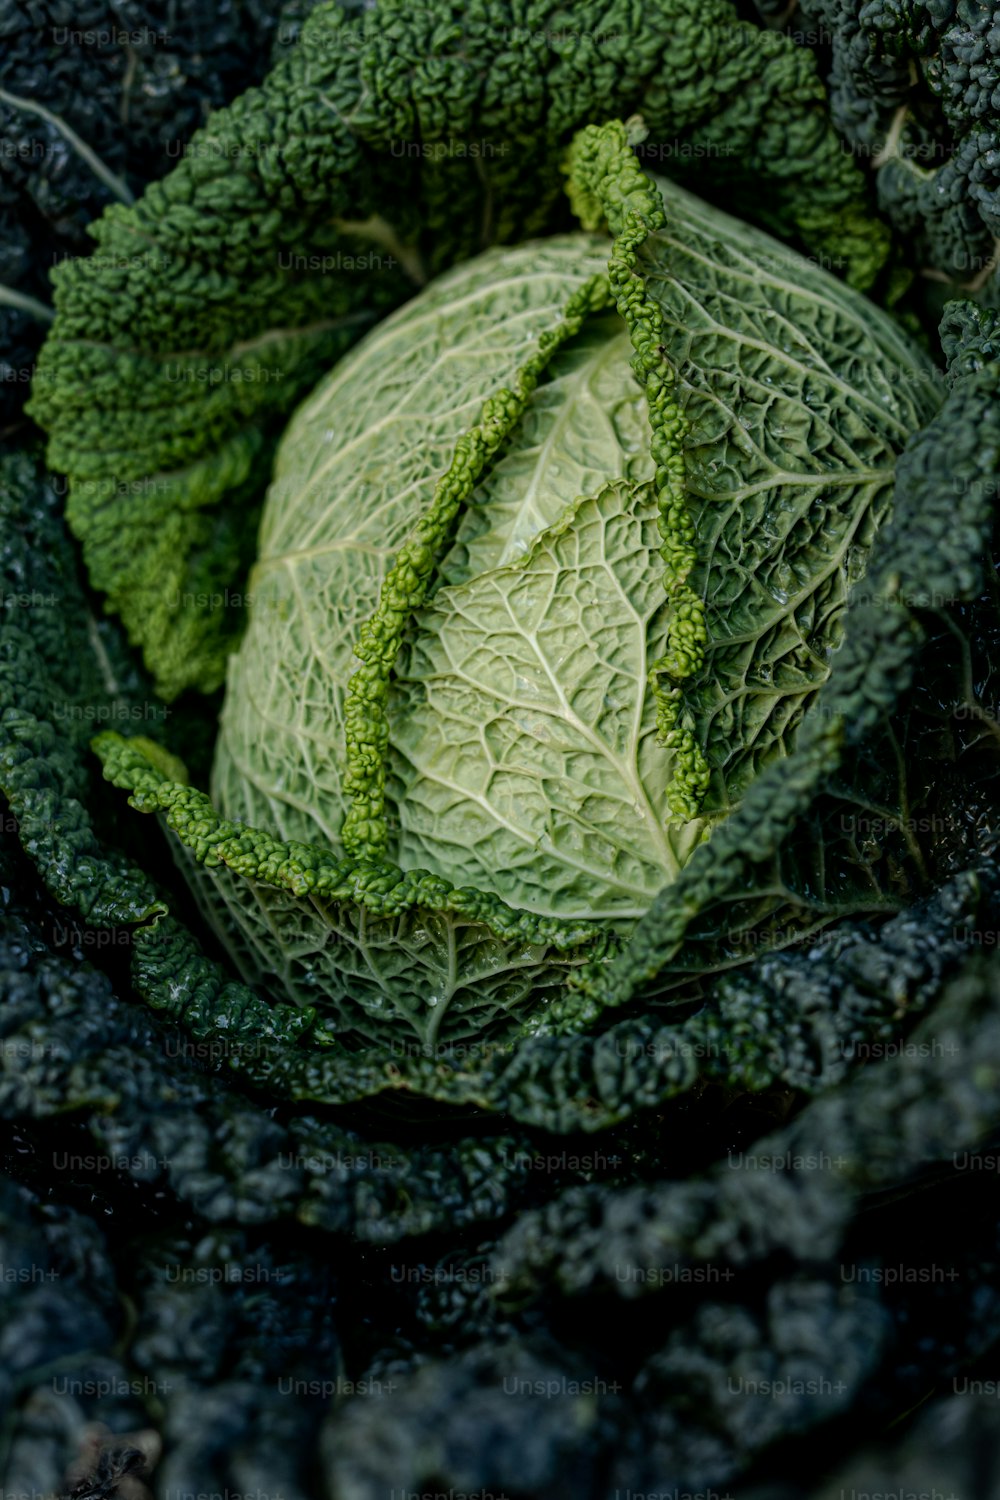 a head of cabbage sitting in the middle of a bed of lettuce